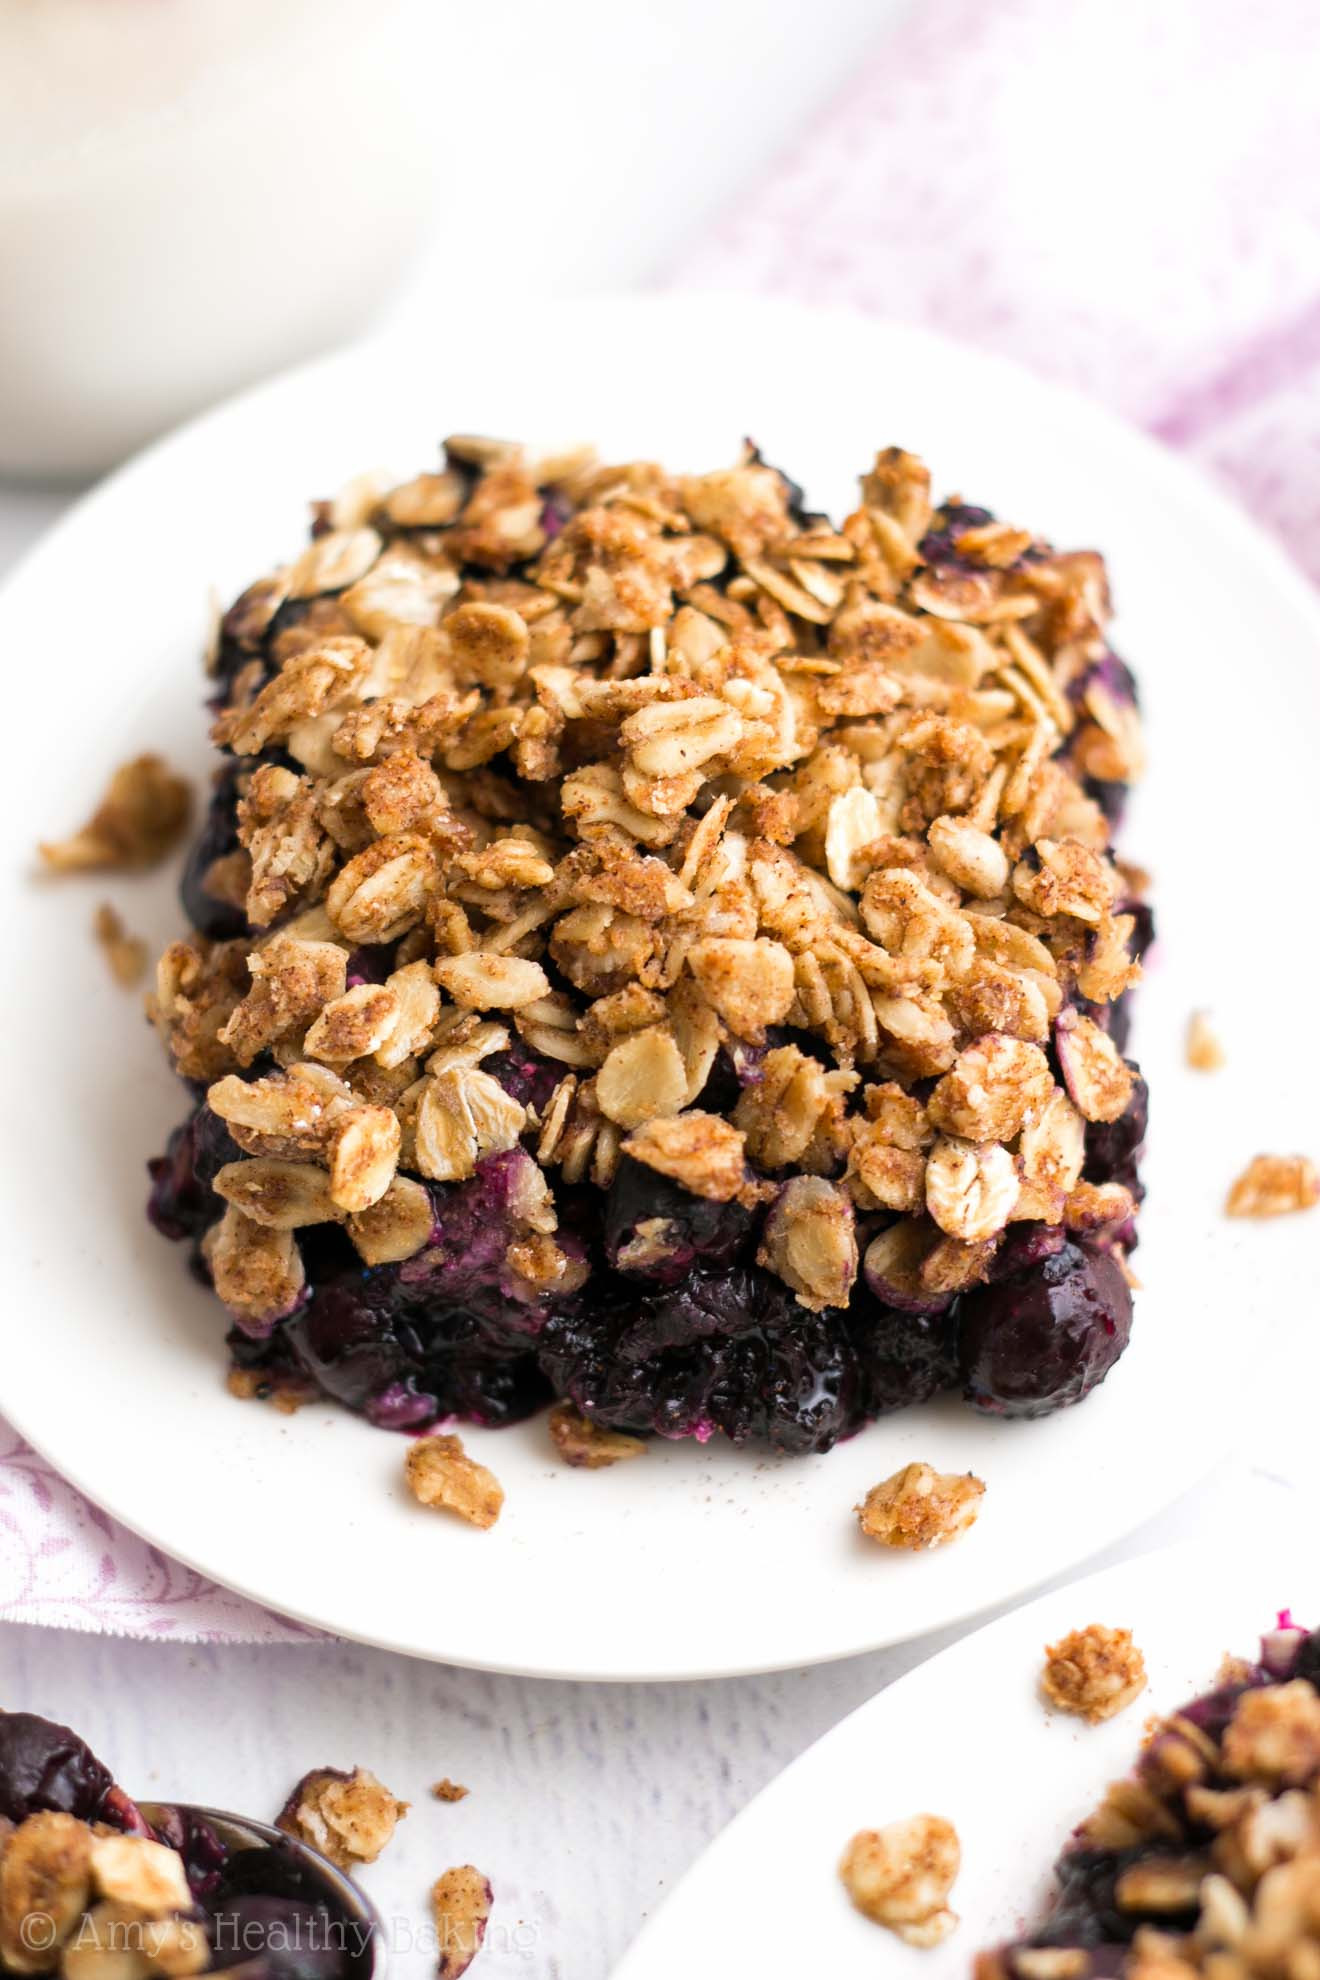 Blueberry Dessert Healthy
 The Ultimate Healthy Blueberry Crumble Recipe Video